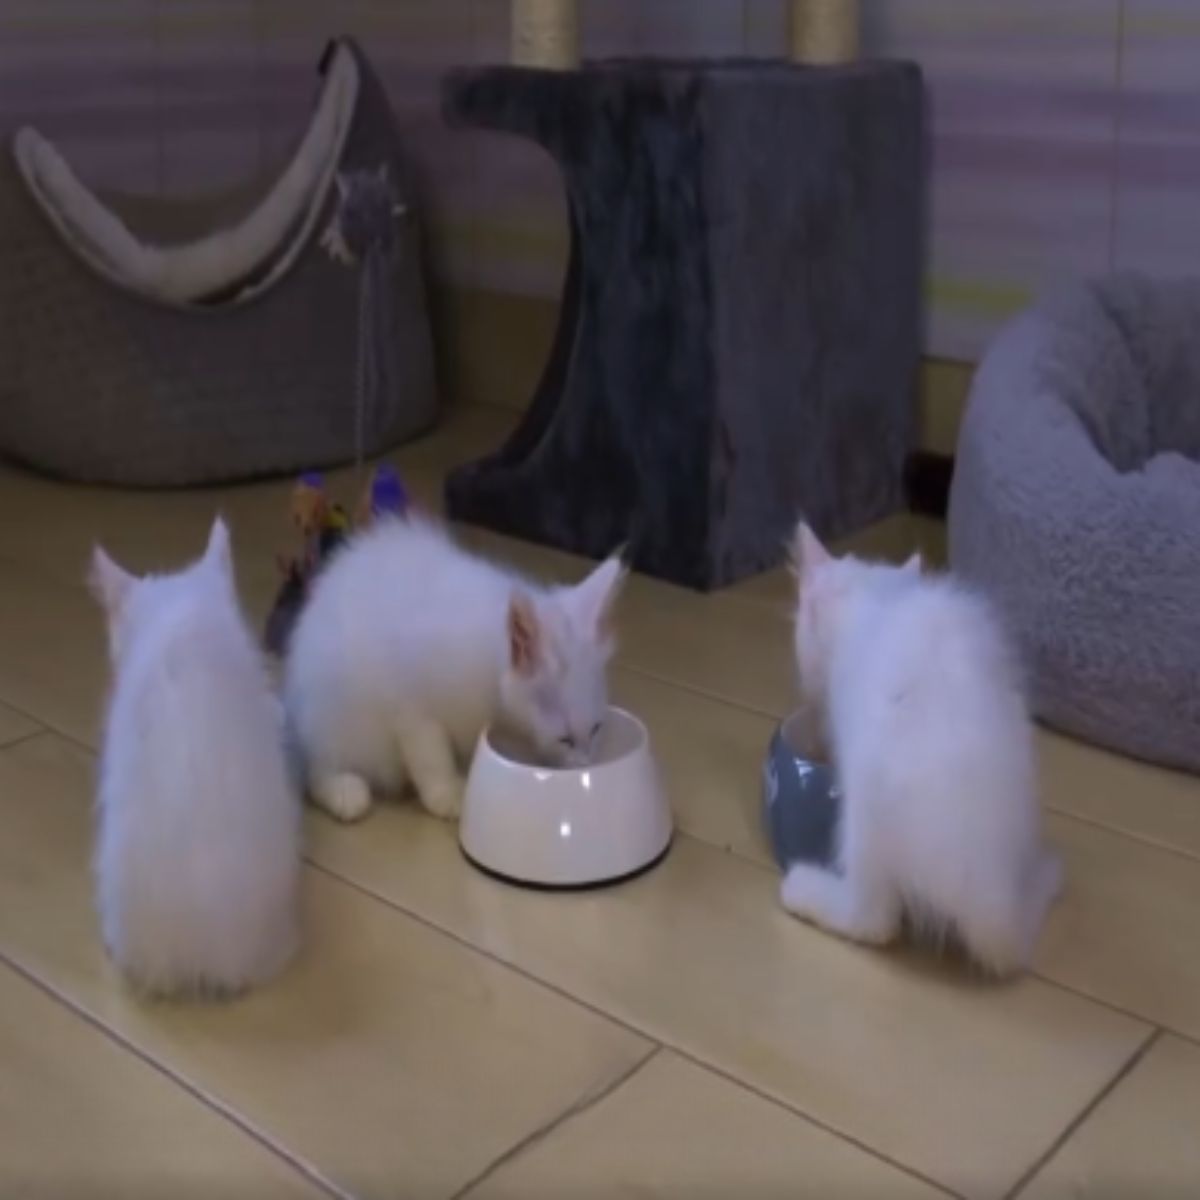 kittens eating food from bowls